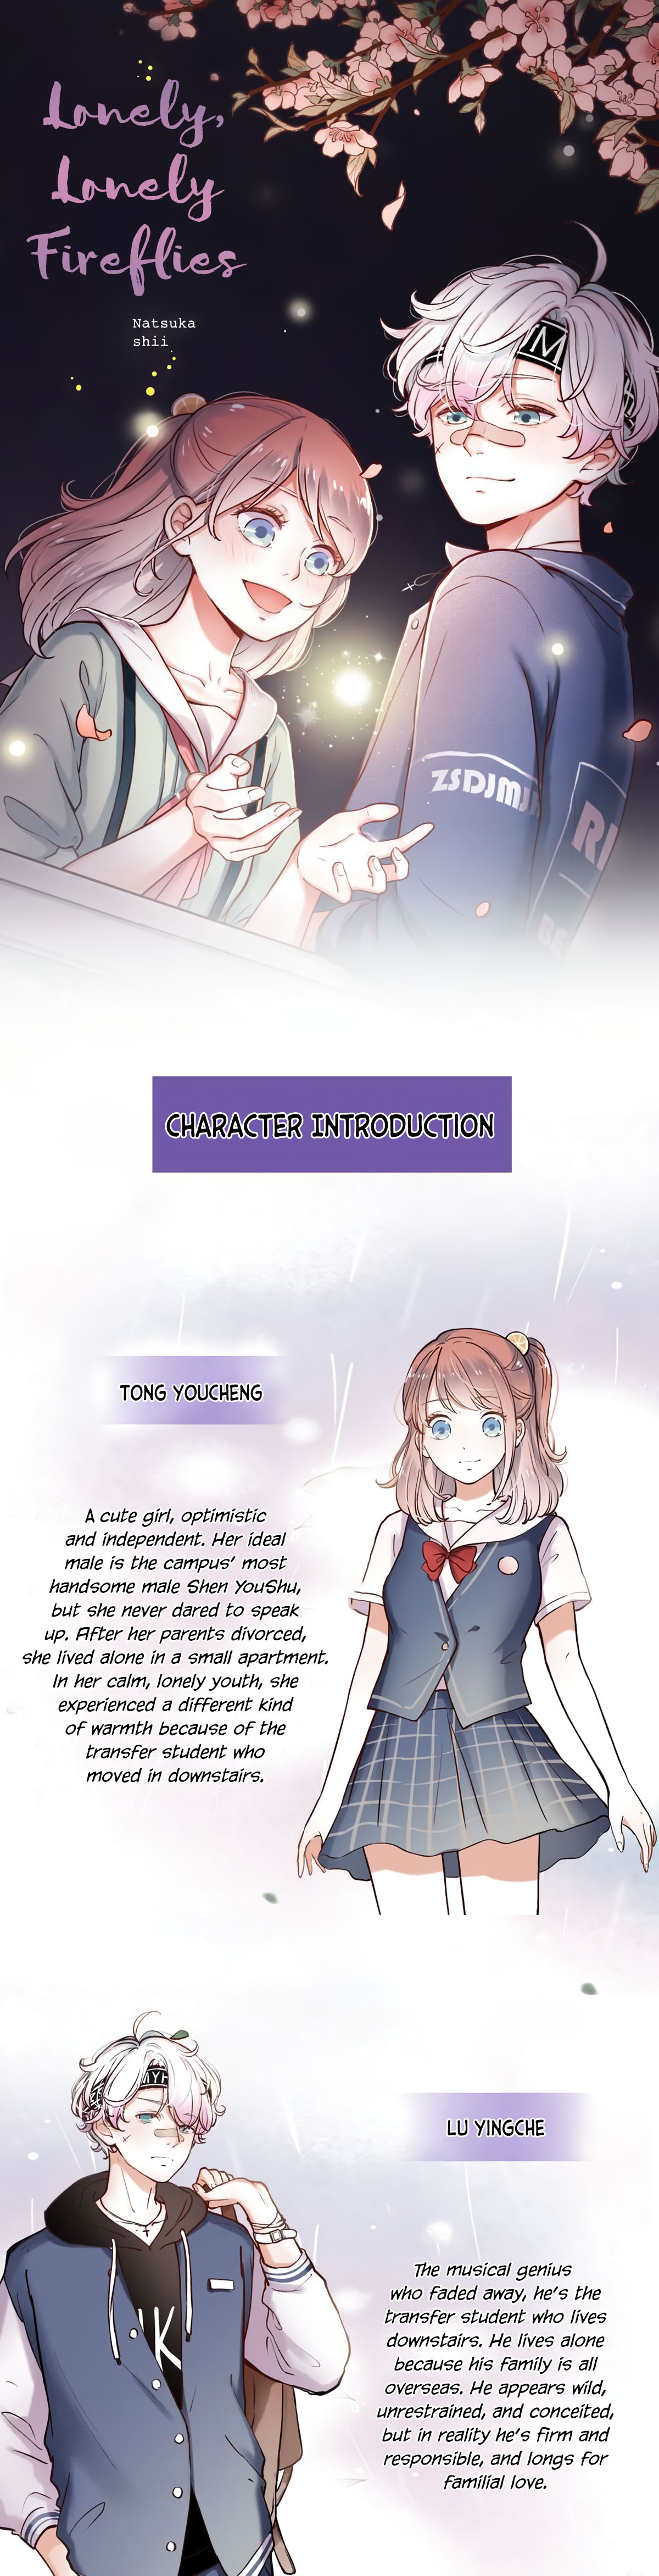 Lonely, Lonely Fireflies Ch. 0.5 Character Introductions